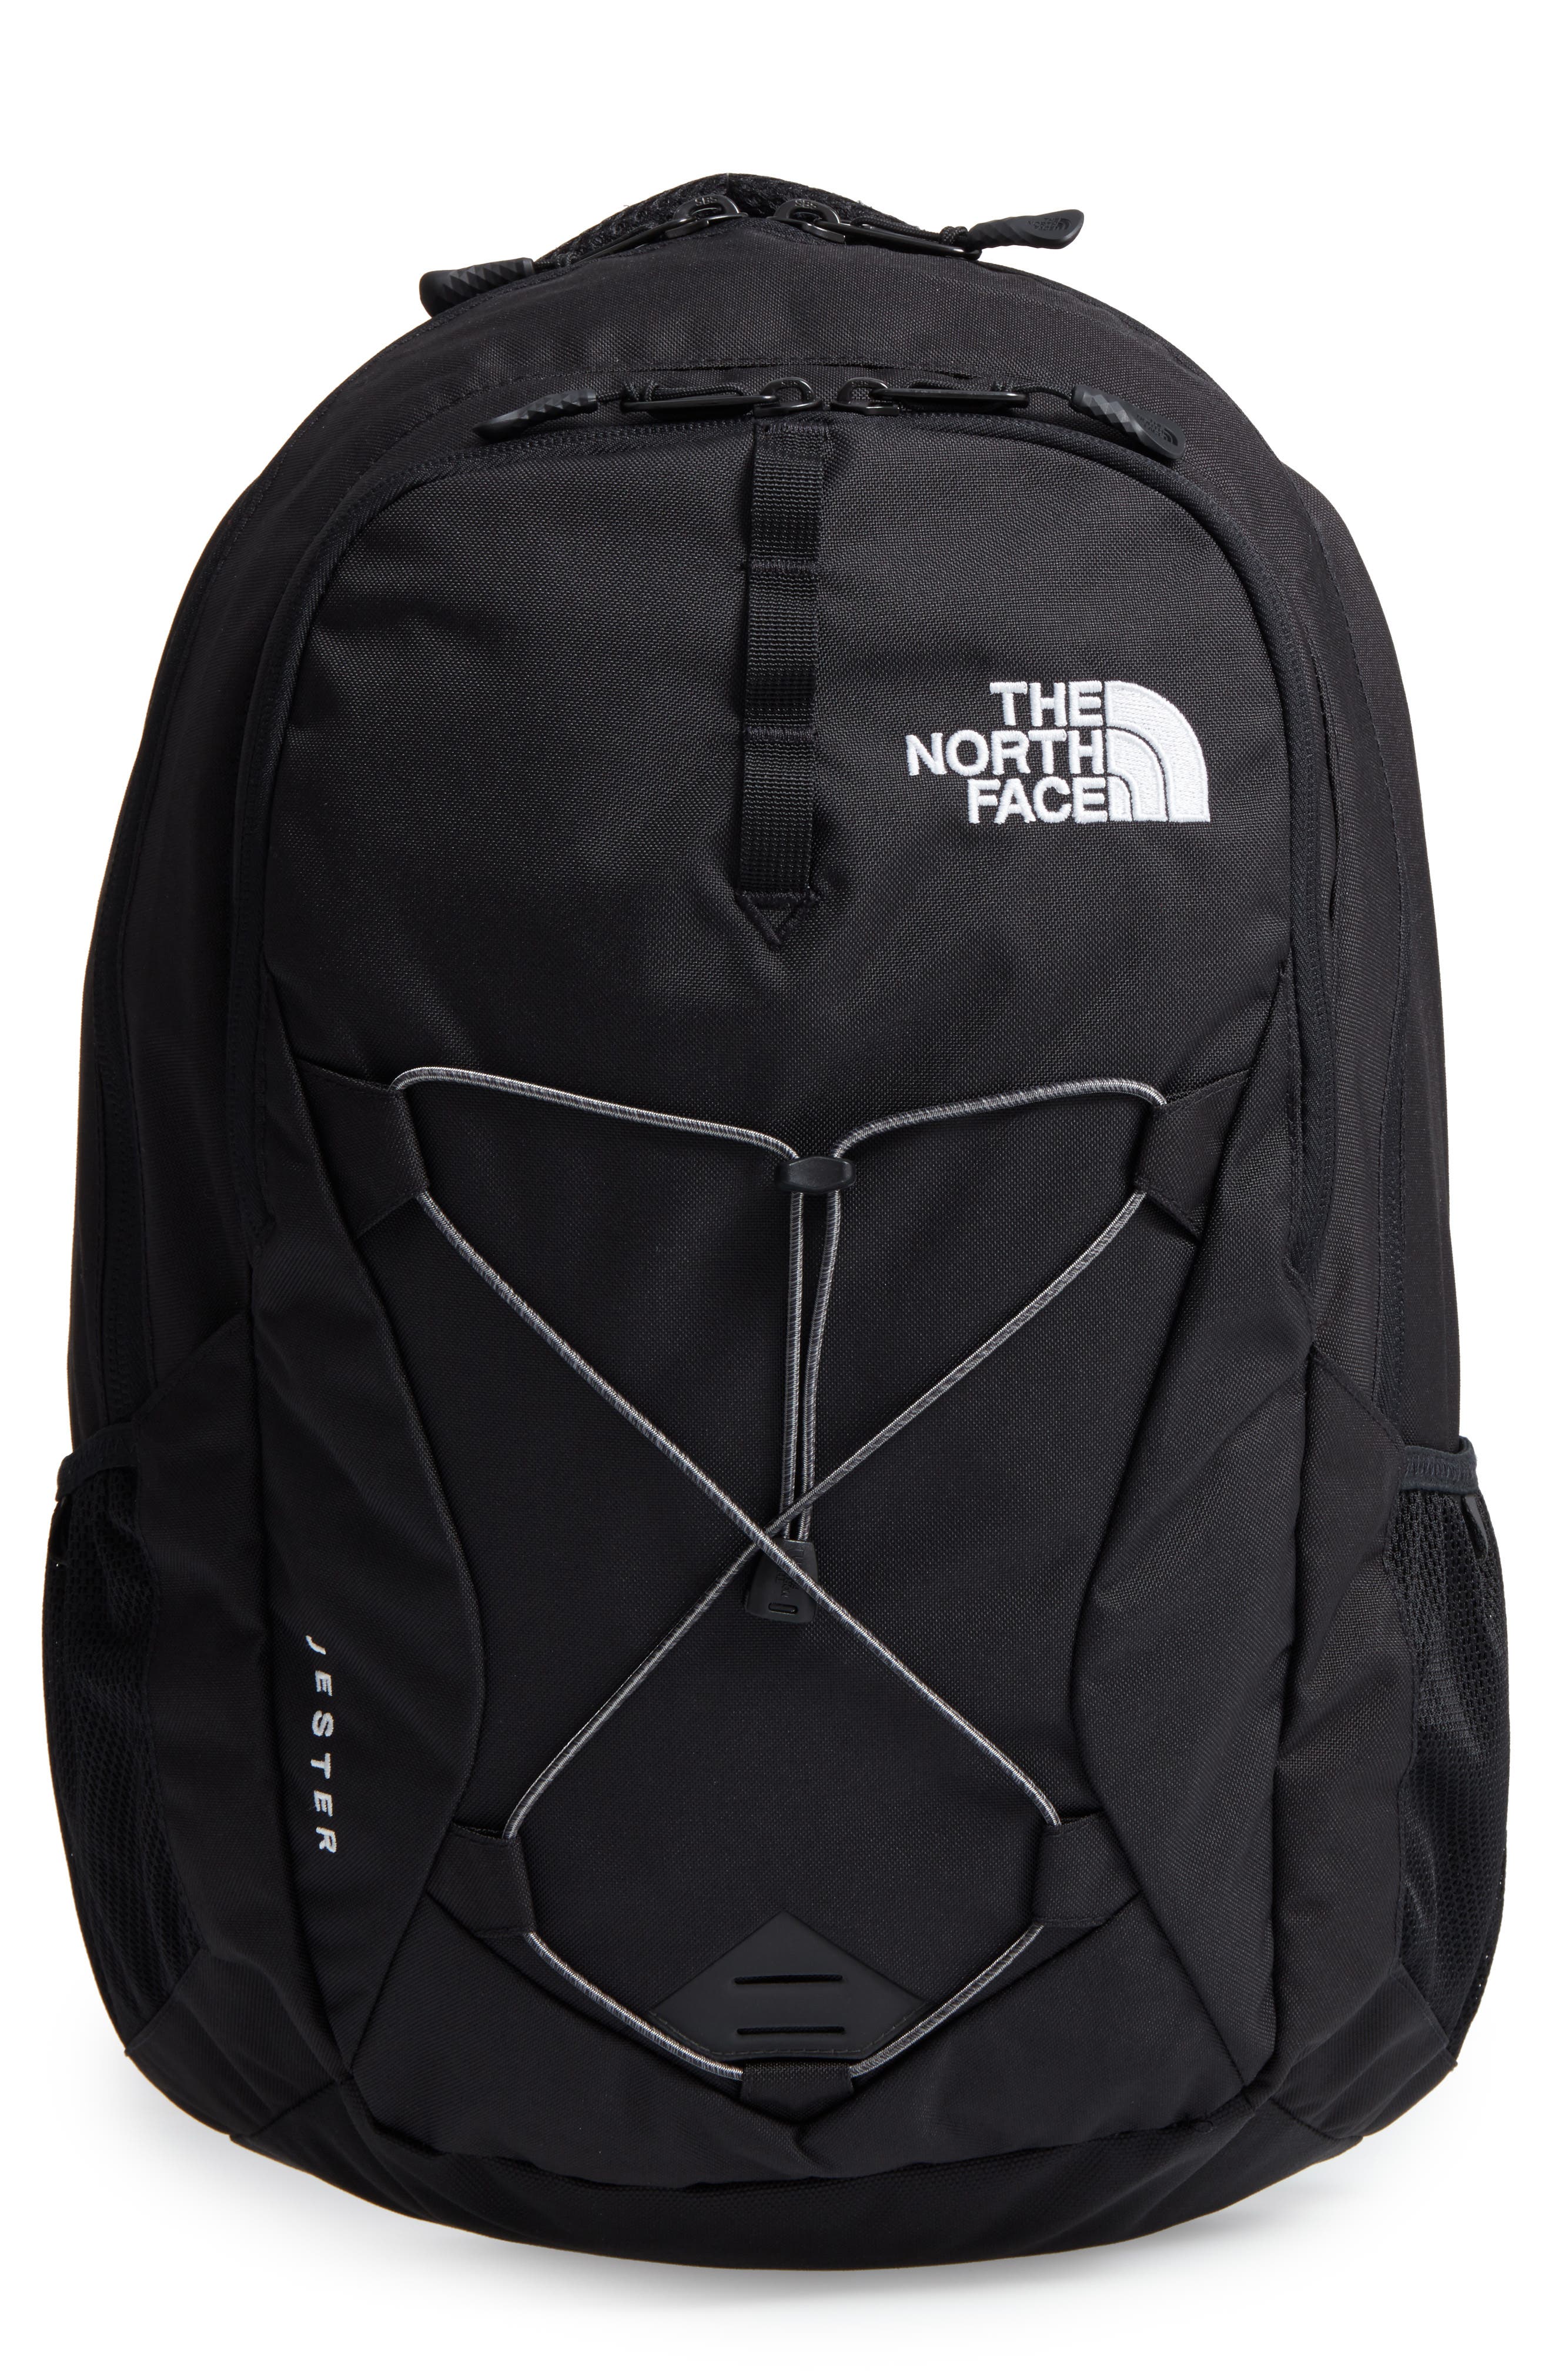 The North Face 'JESTER' BACKPACK - BLACK